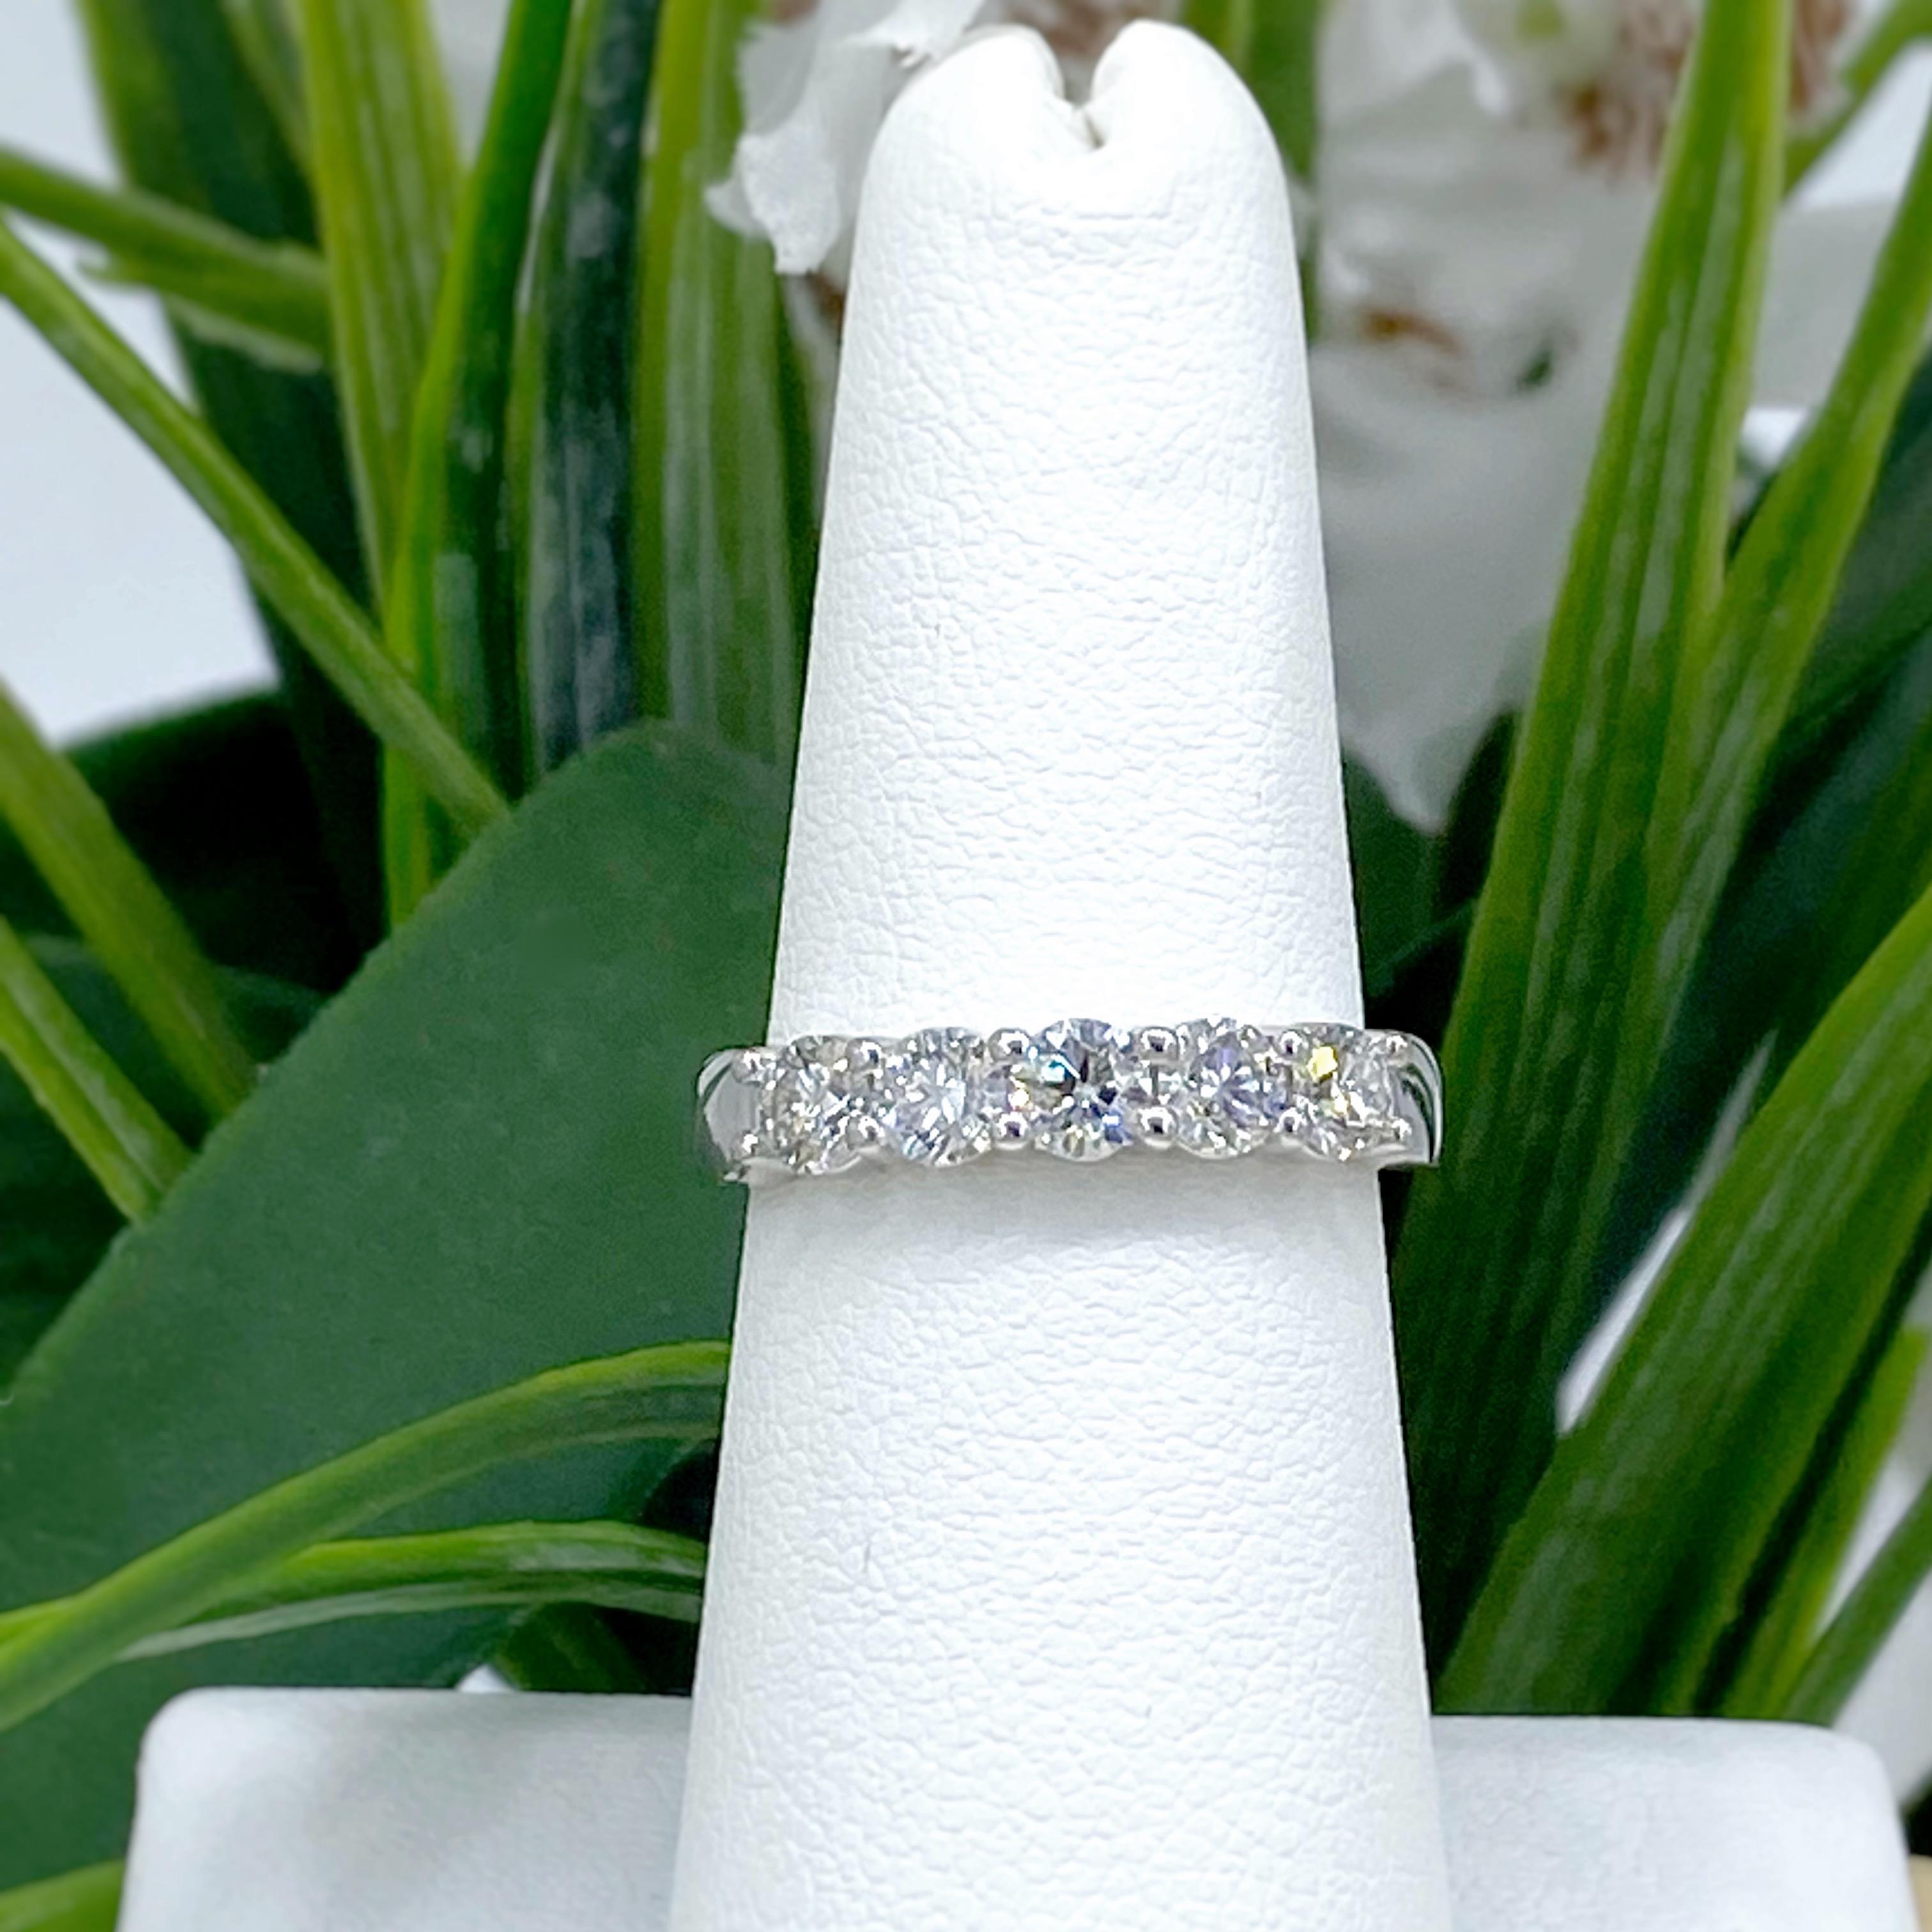 Celebration Grand Diamonds Five Diamond Band Ring 14kt White Gold In Excellent Condition For Sale In San Diego, CA